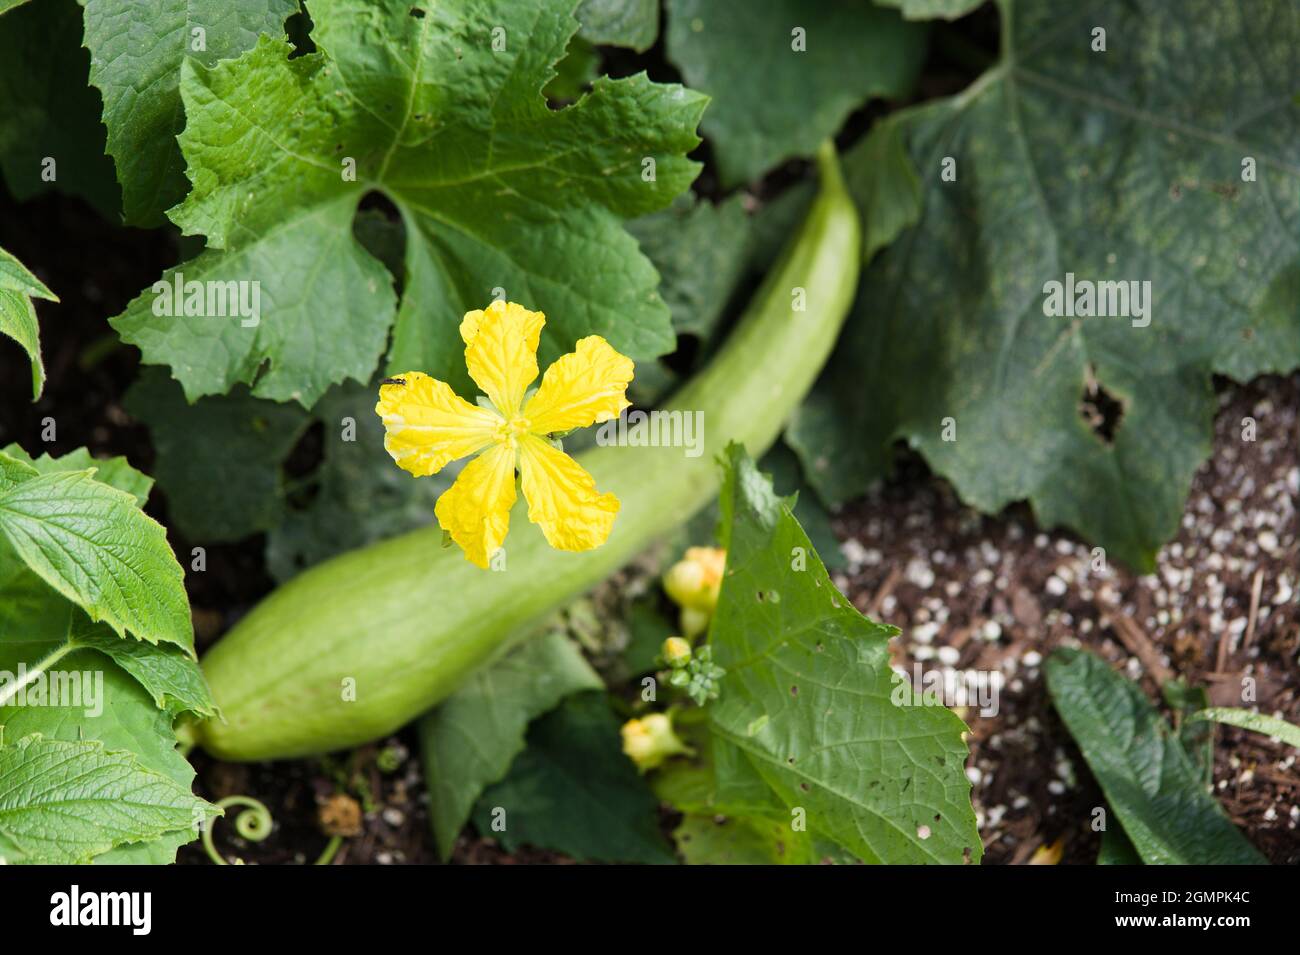 Close-up of a subtropical vegetable Loofah plant growing from a vine ( Luffa cylindrica ) Stock Photo